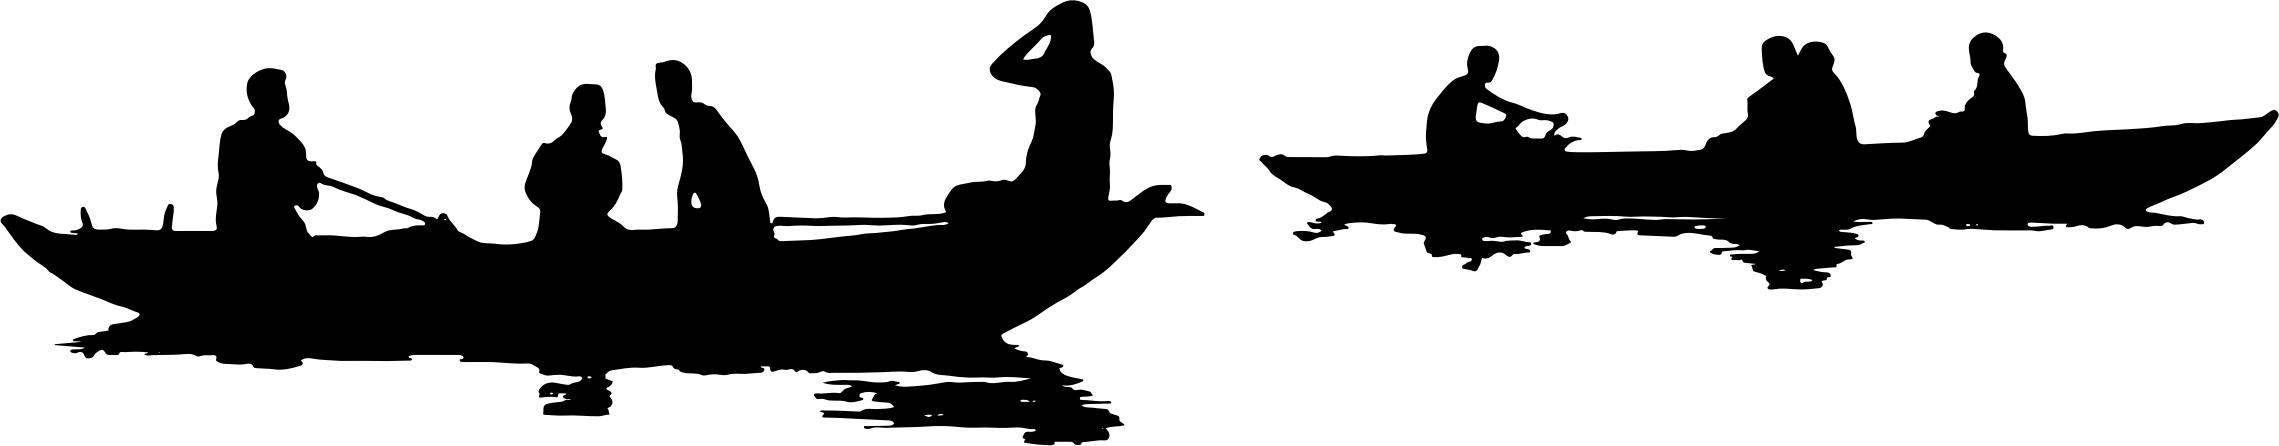 People In Boats Silhouette png icons